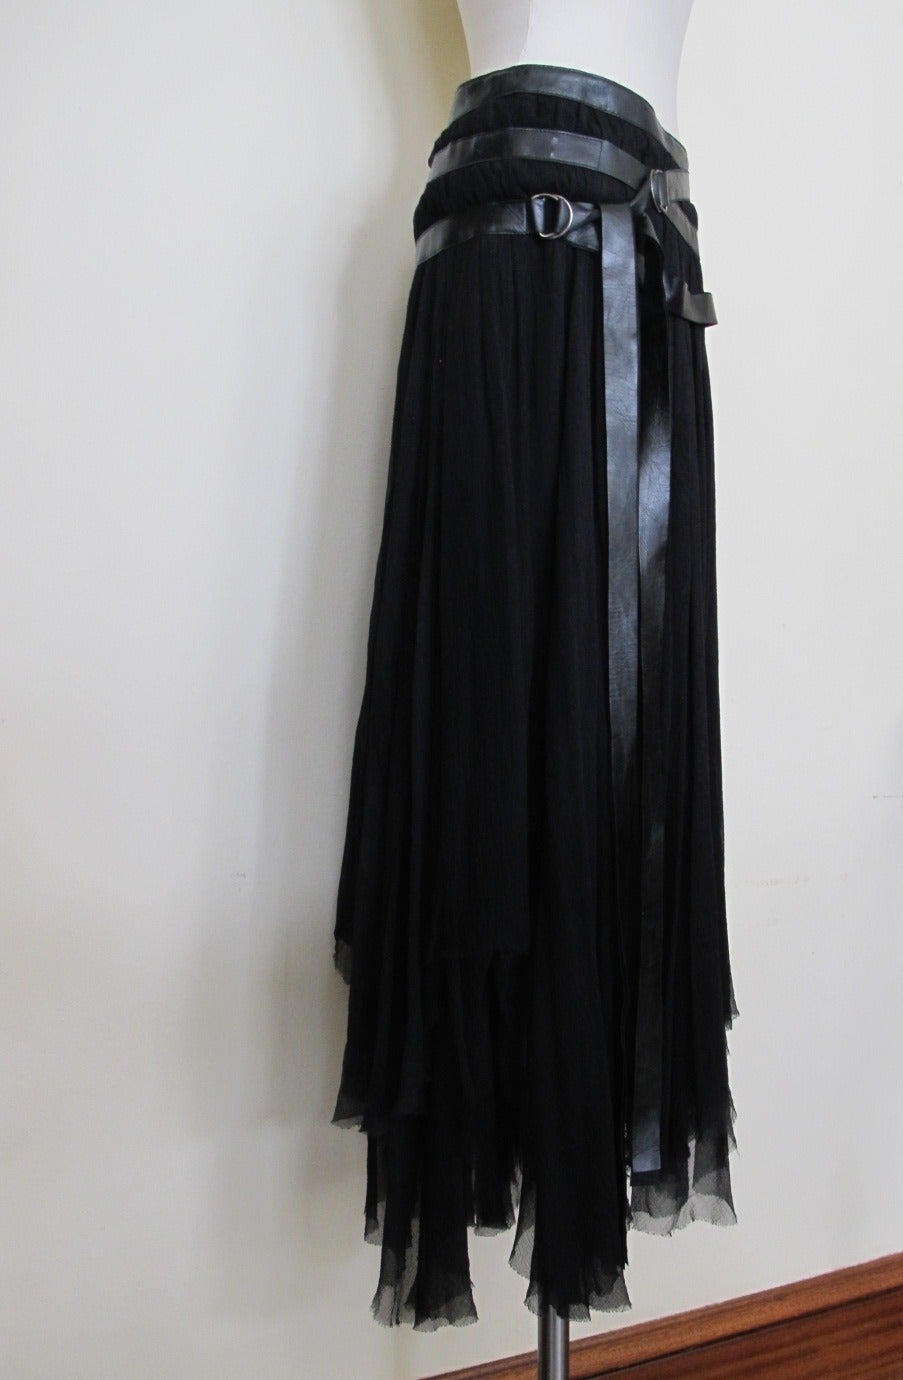 Alexander McQueen 2002 Hipster Harness Skirt In Excellent Condition For Sale In San Francisco, CA